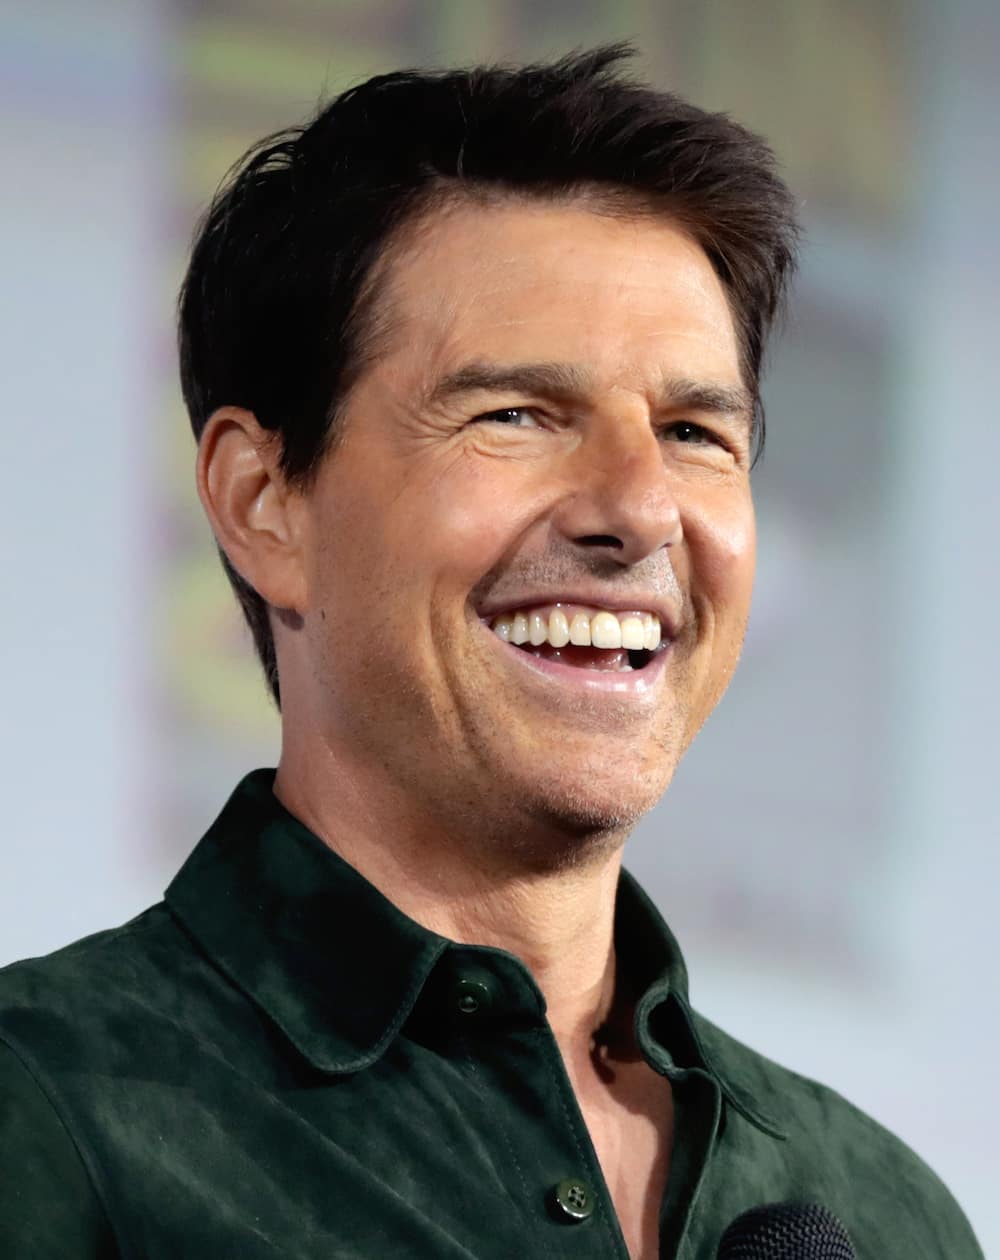 Is Tom Cruise rich?